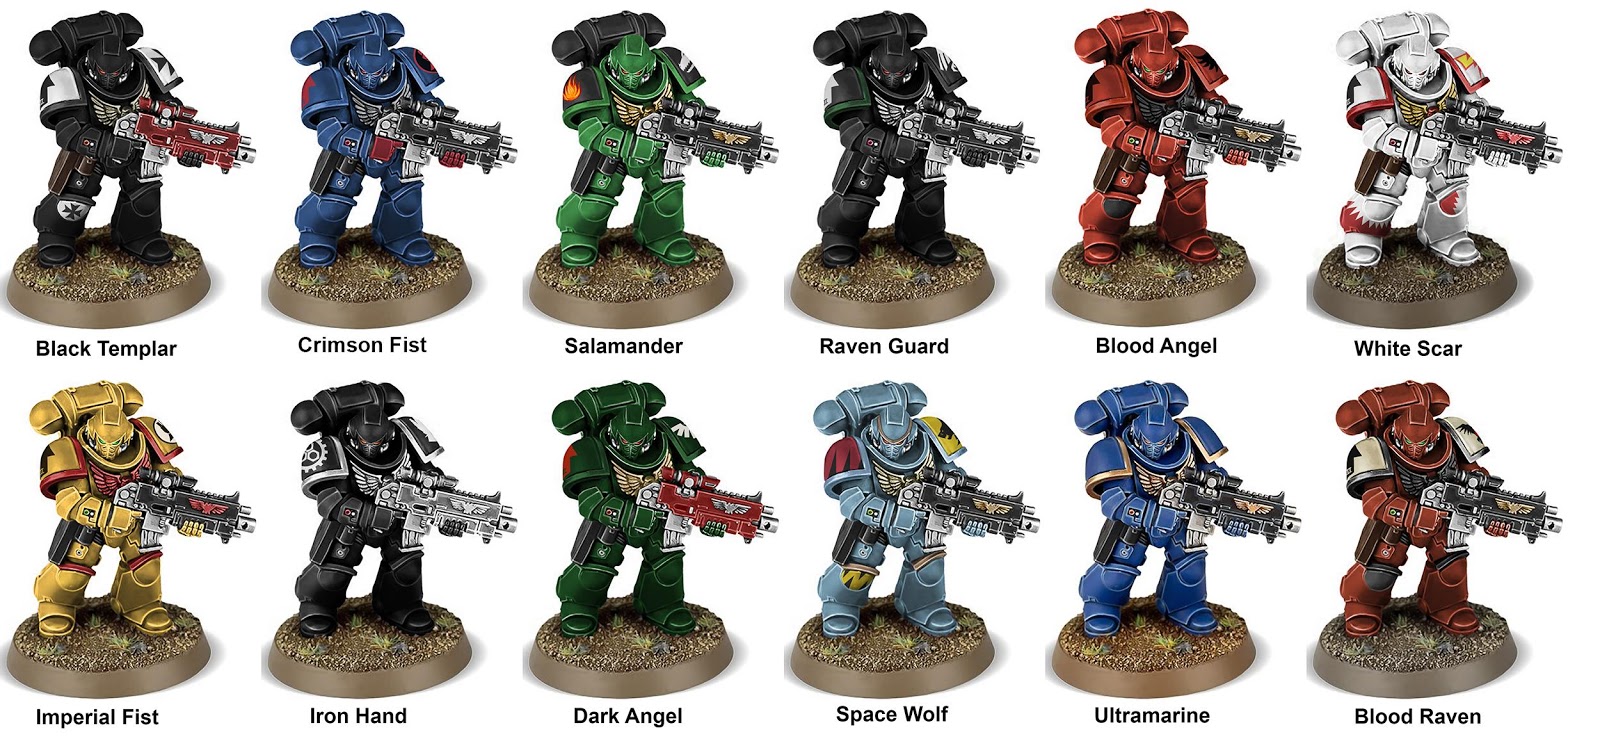 How do I paint the miniatures of different factions in Warhammer 40K?